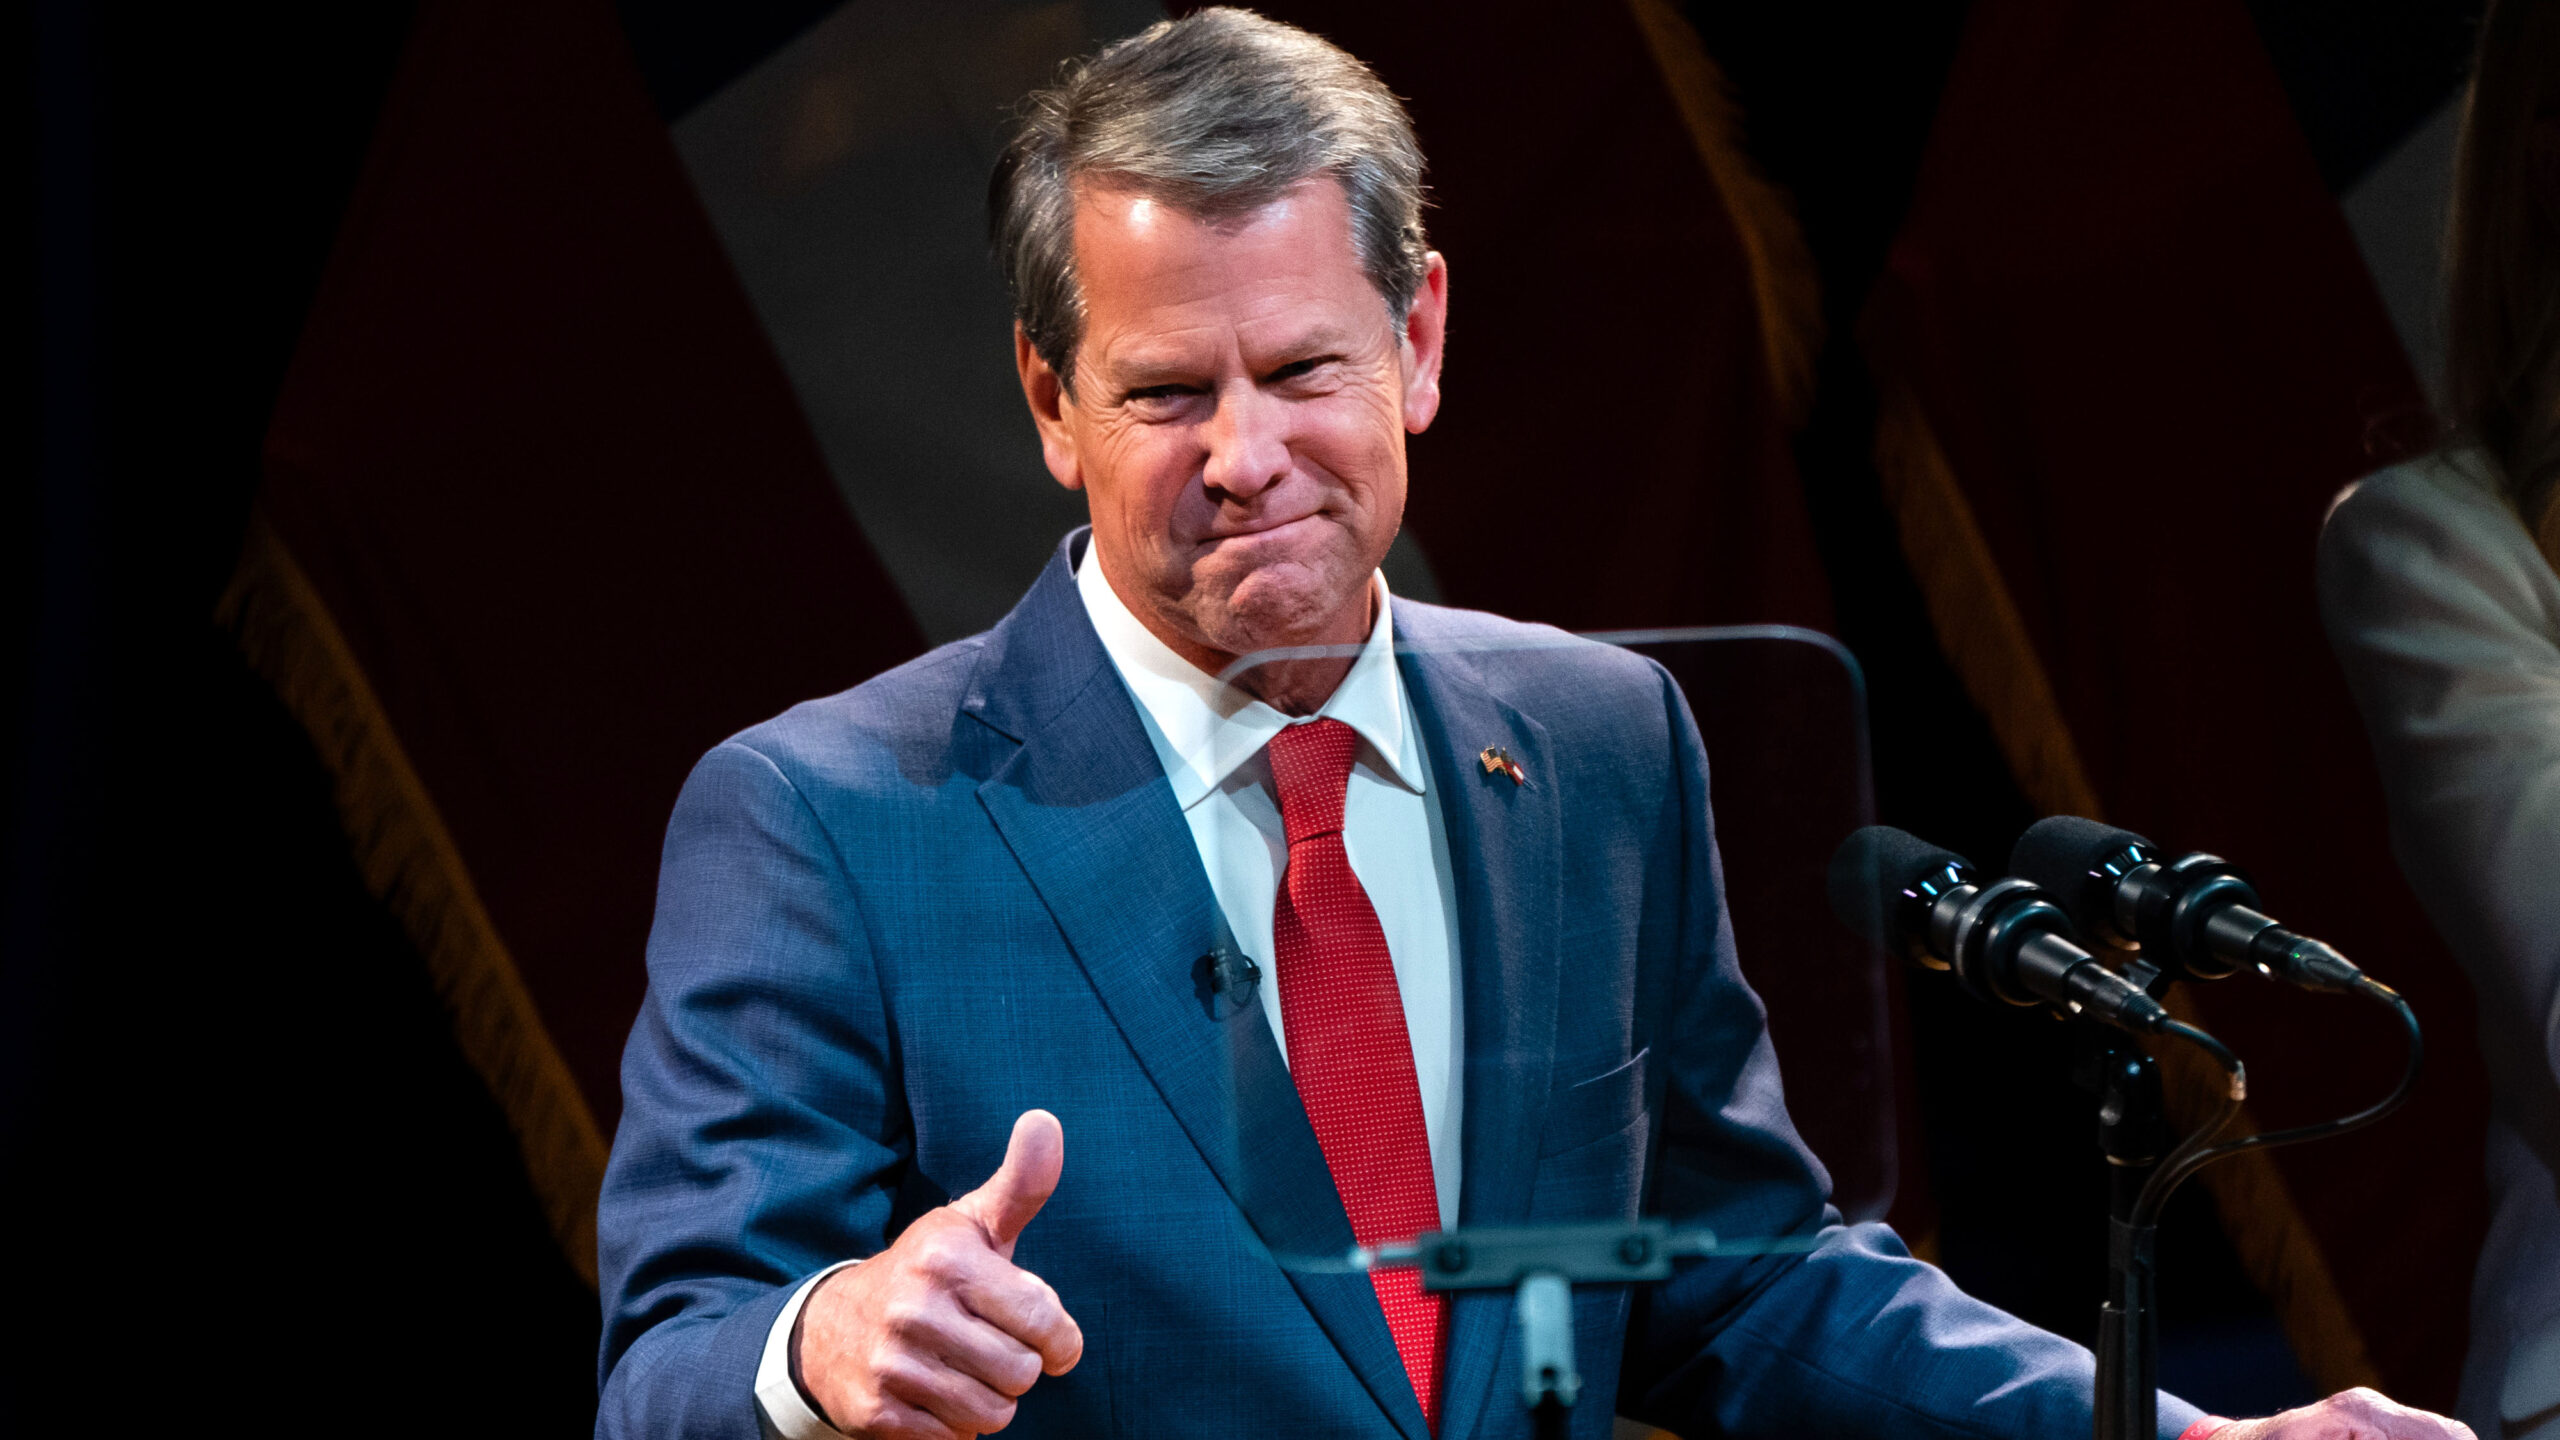 Governor Brian Kemp Takes Shot At Trump: ‘We Cannot Get Distracted’ In 2024 Presidential Race